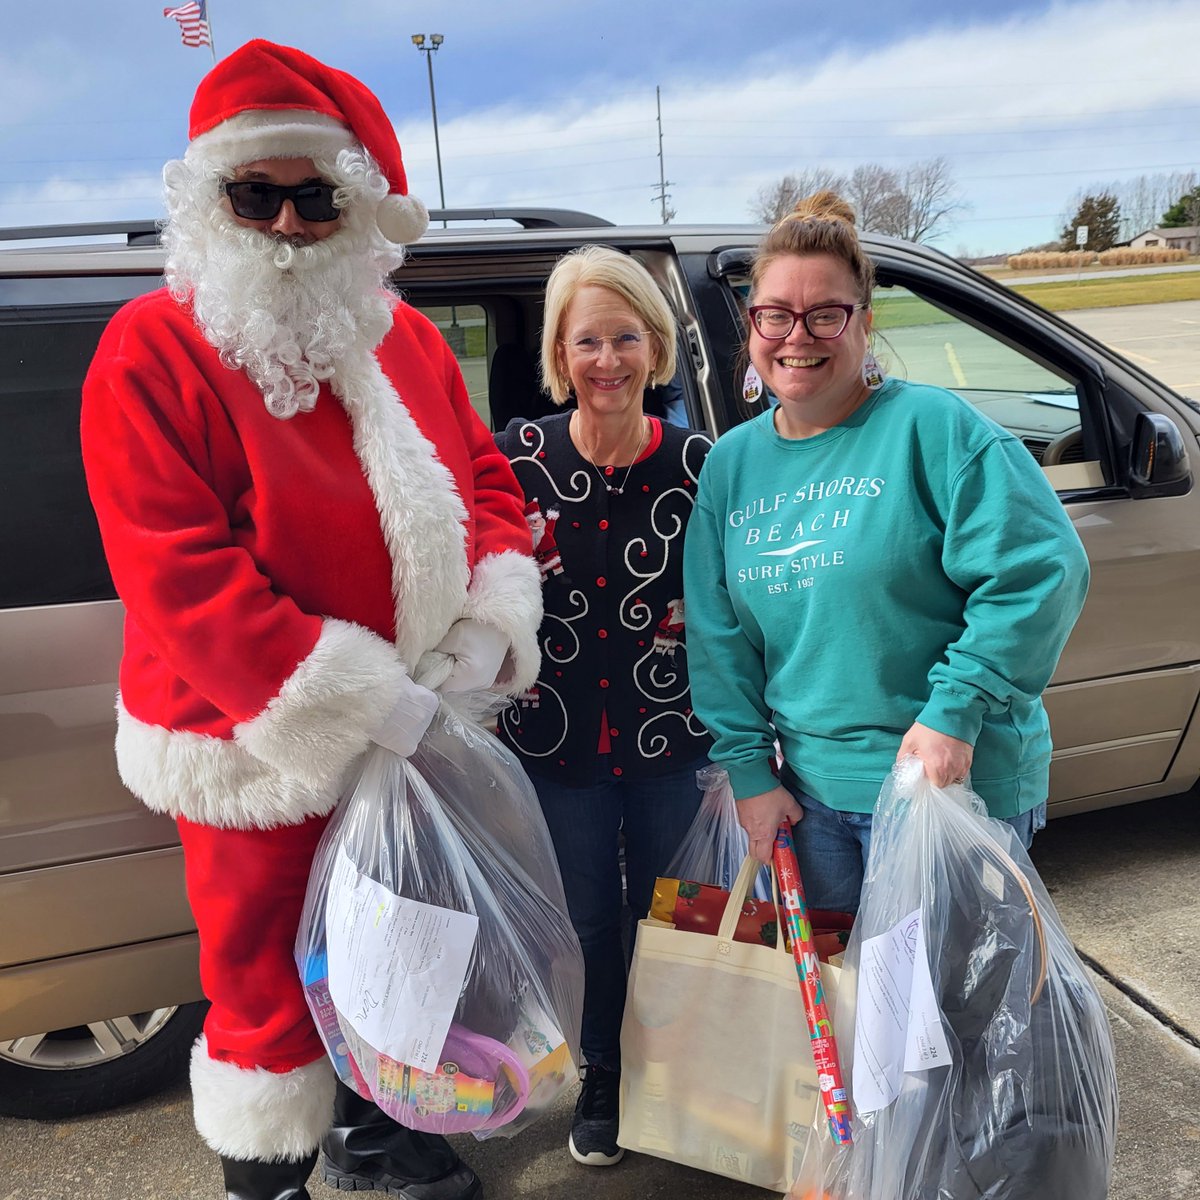 Santa Claus made a special appearance at the Effingham County FISH/Catholic Charities Christmas store!
Pictured below, Santa helps Beth Lindvahl (Catholic Charities Board) and Brandi Miller (World Finance Volunteer) help load cars at the event.
#catholiccharities #effinghamil